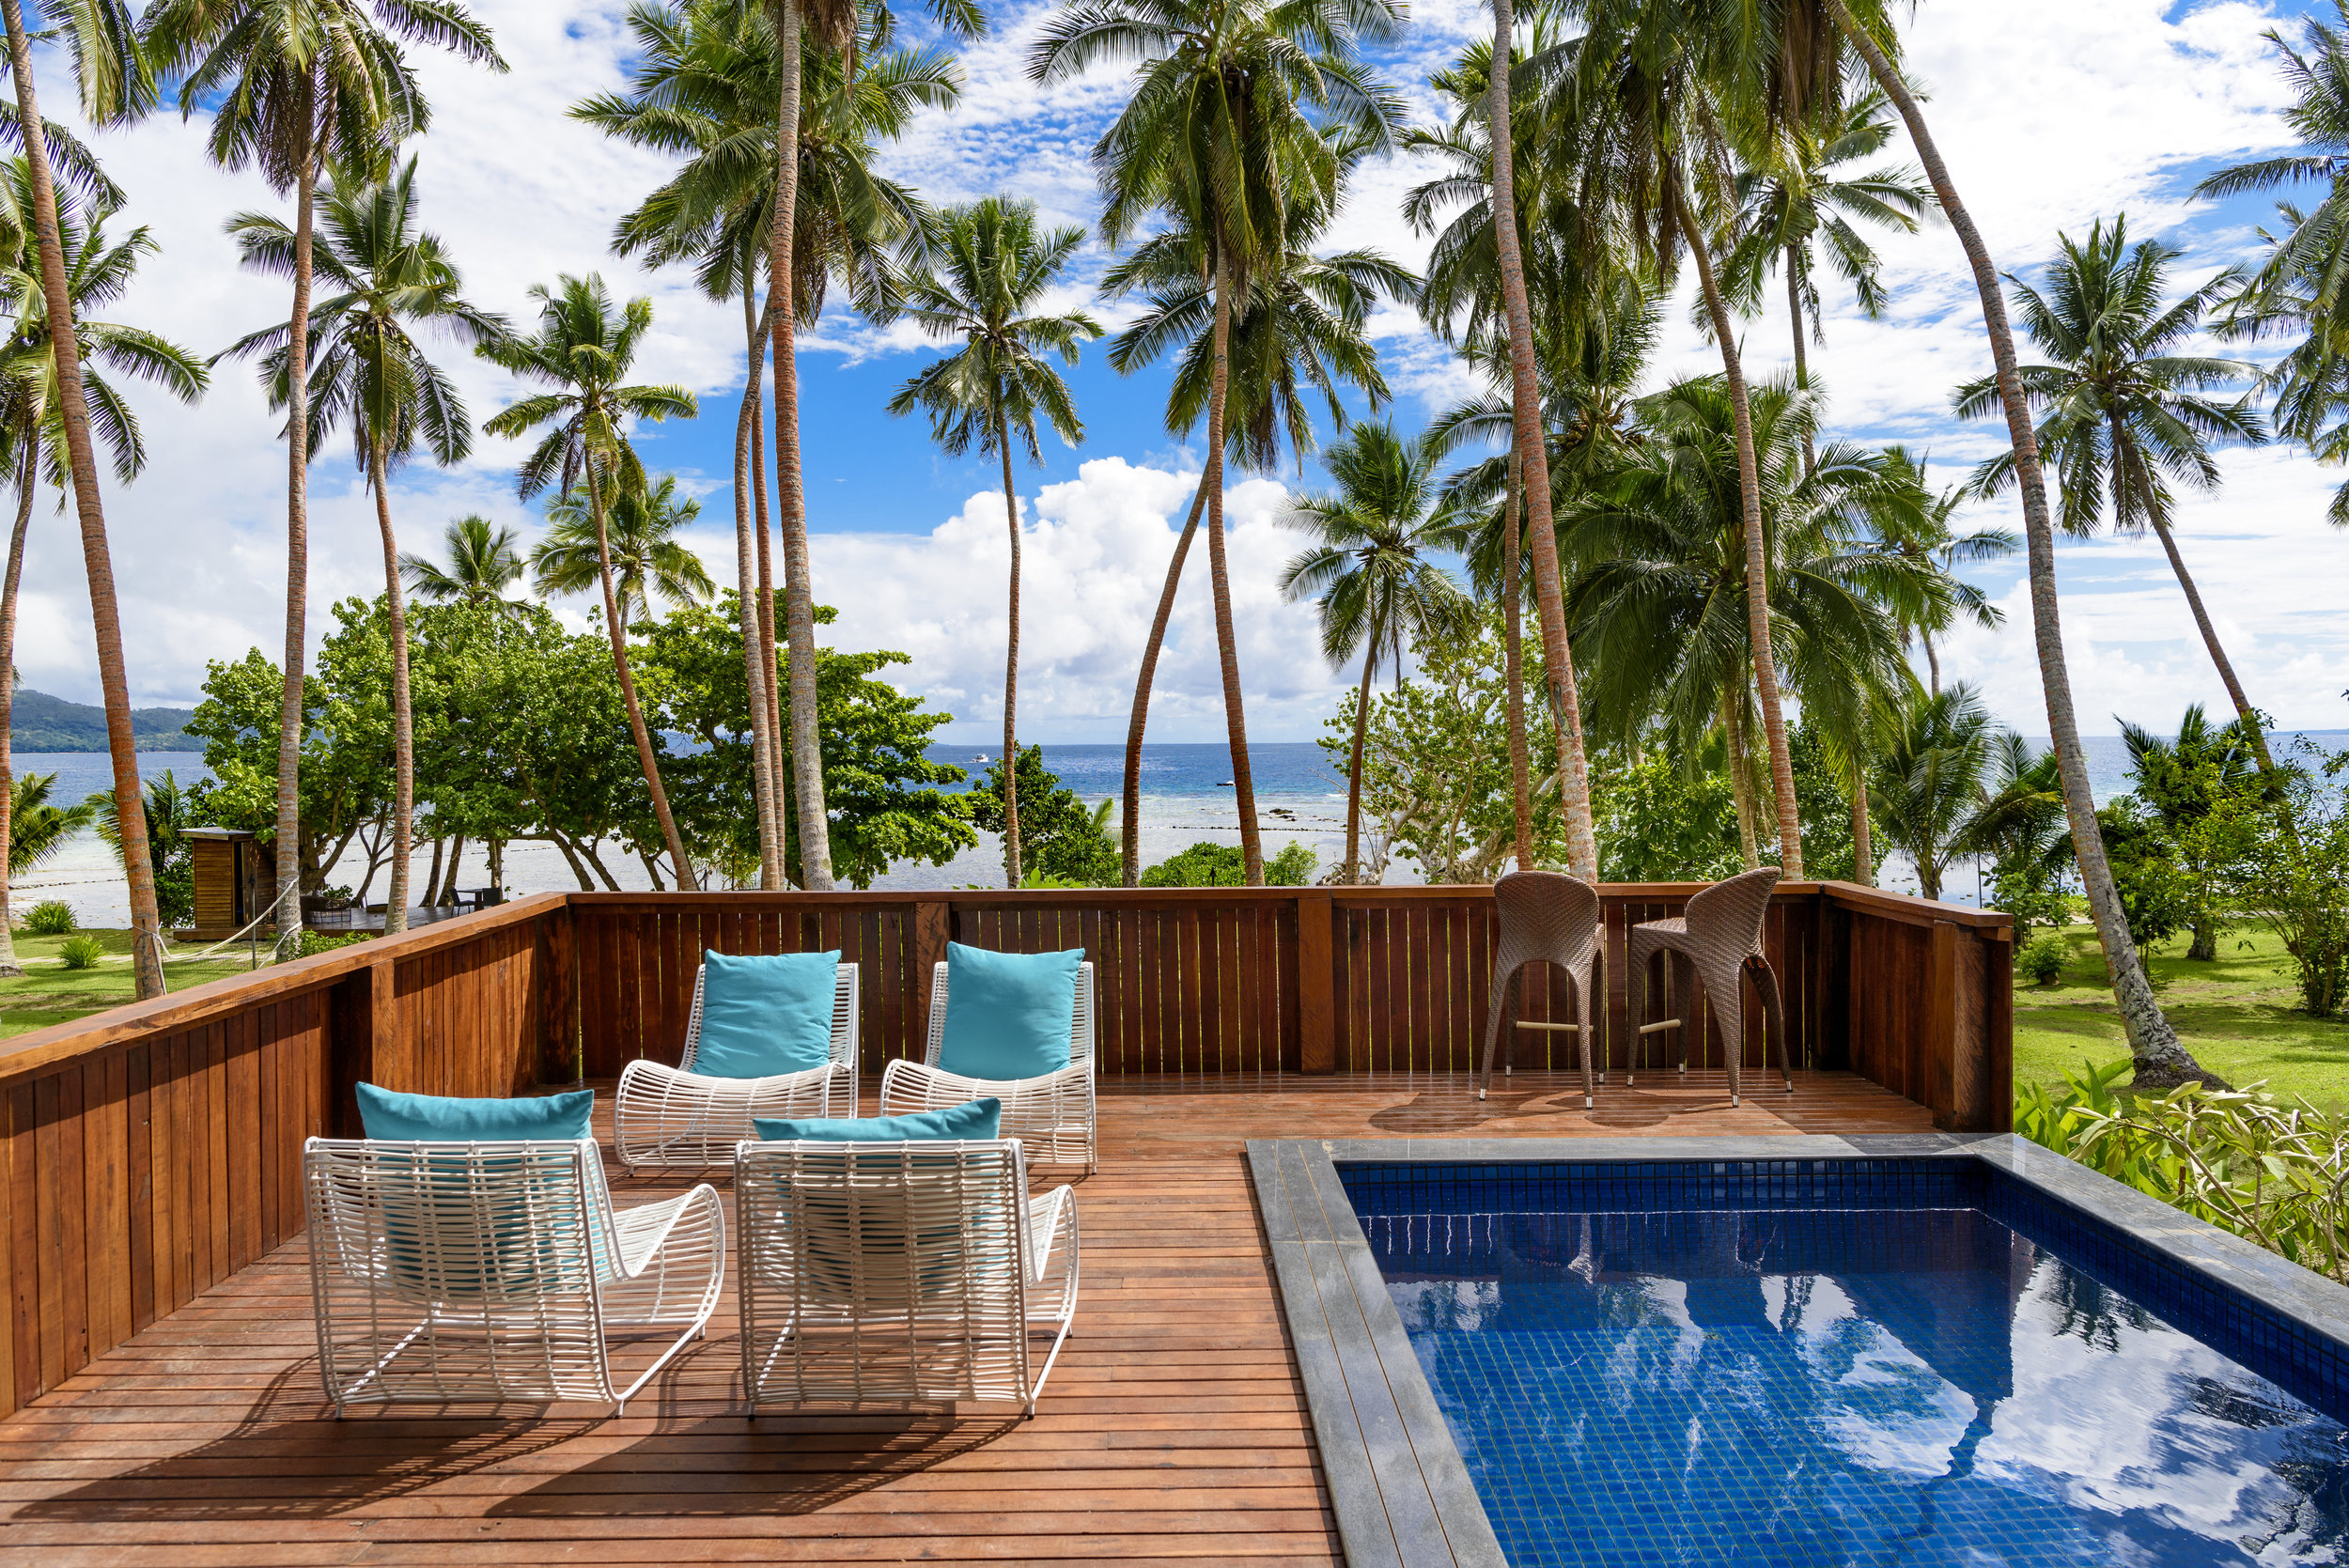 Two-bedroom Royal Retreat - Endless ocean views from the deck, The Remote Resort Fiji Islands